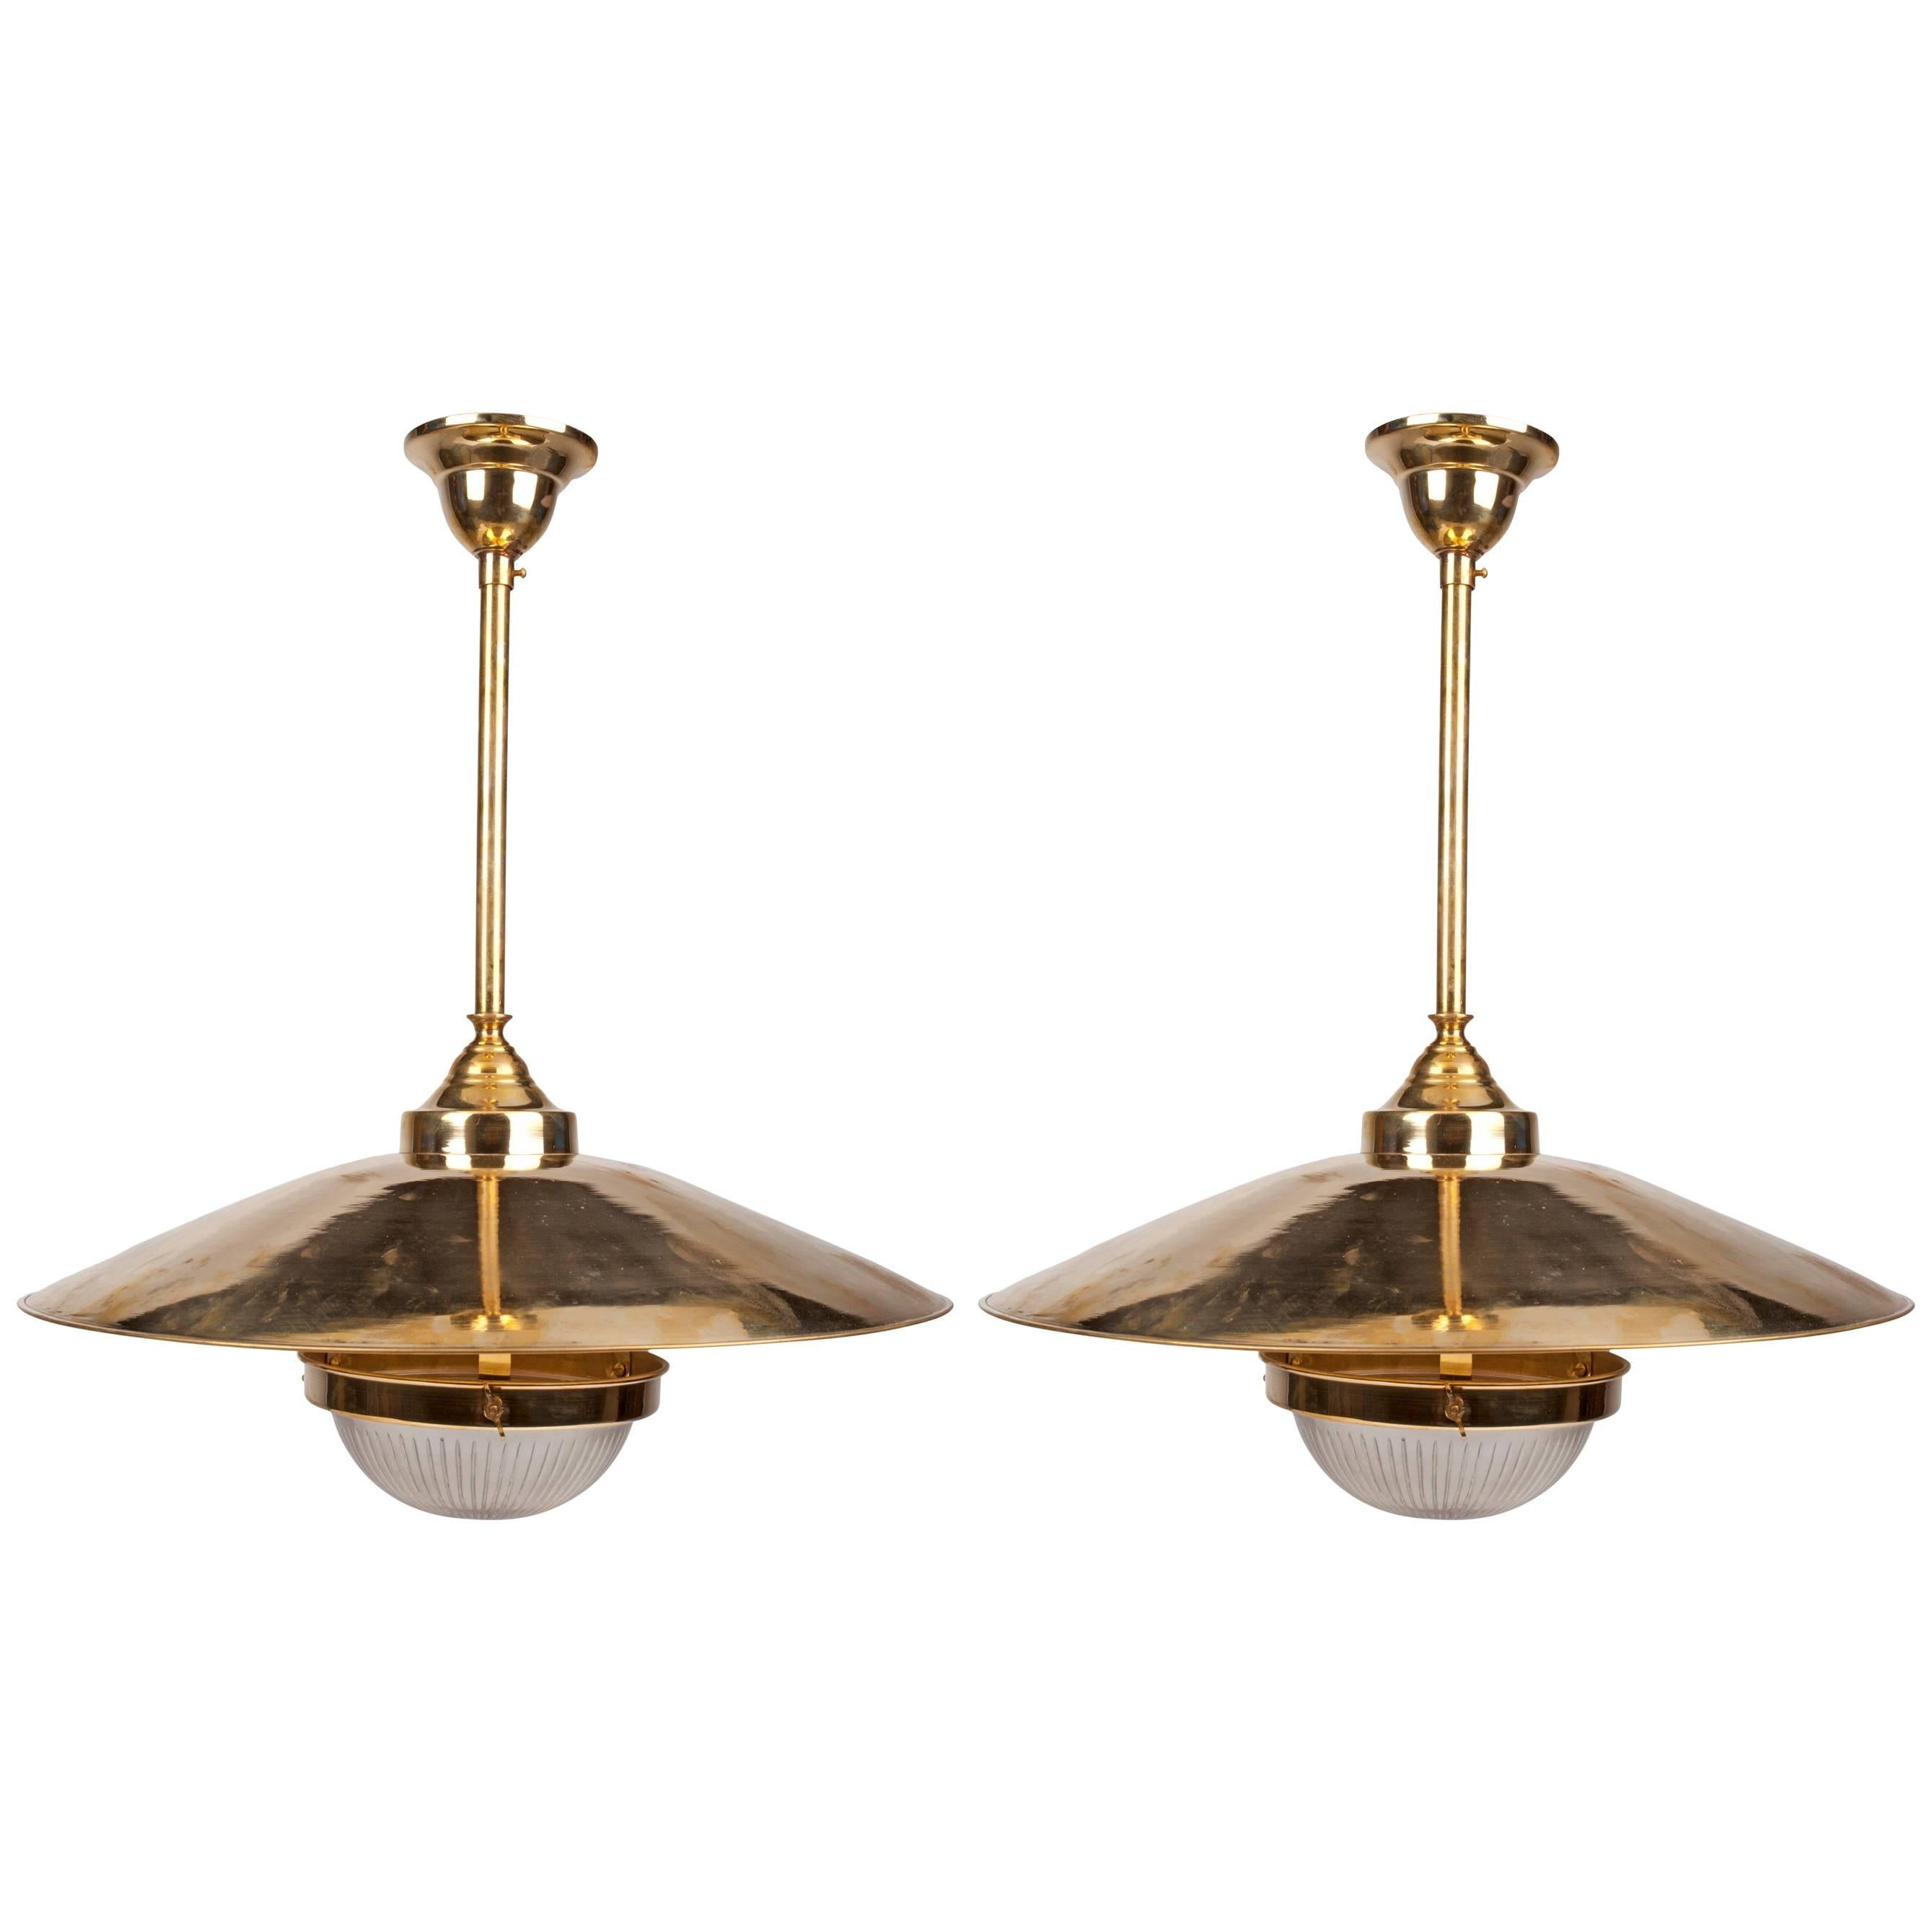 Pair of Brass Pendant Lights with Fresnel Glass Shade, Midcentury